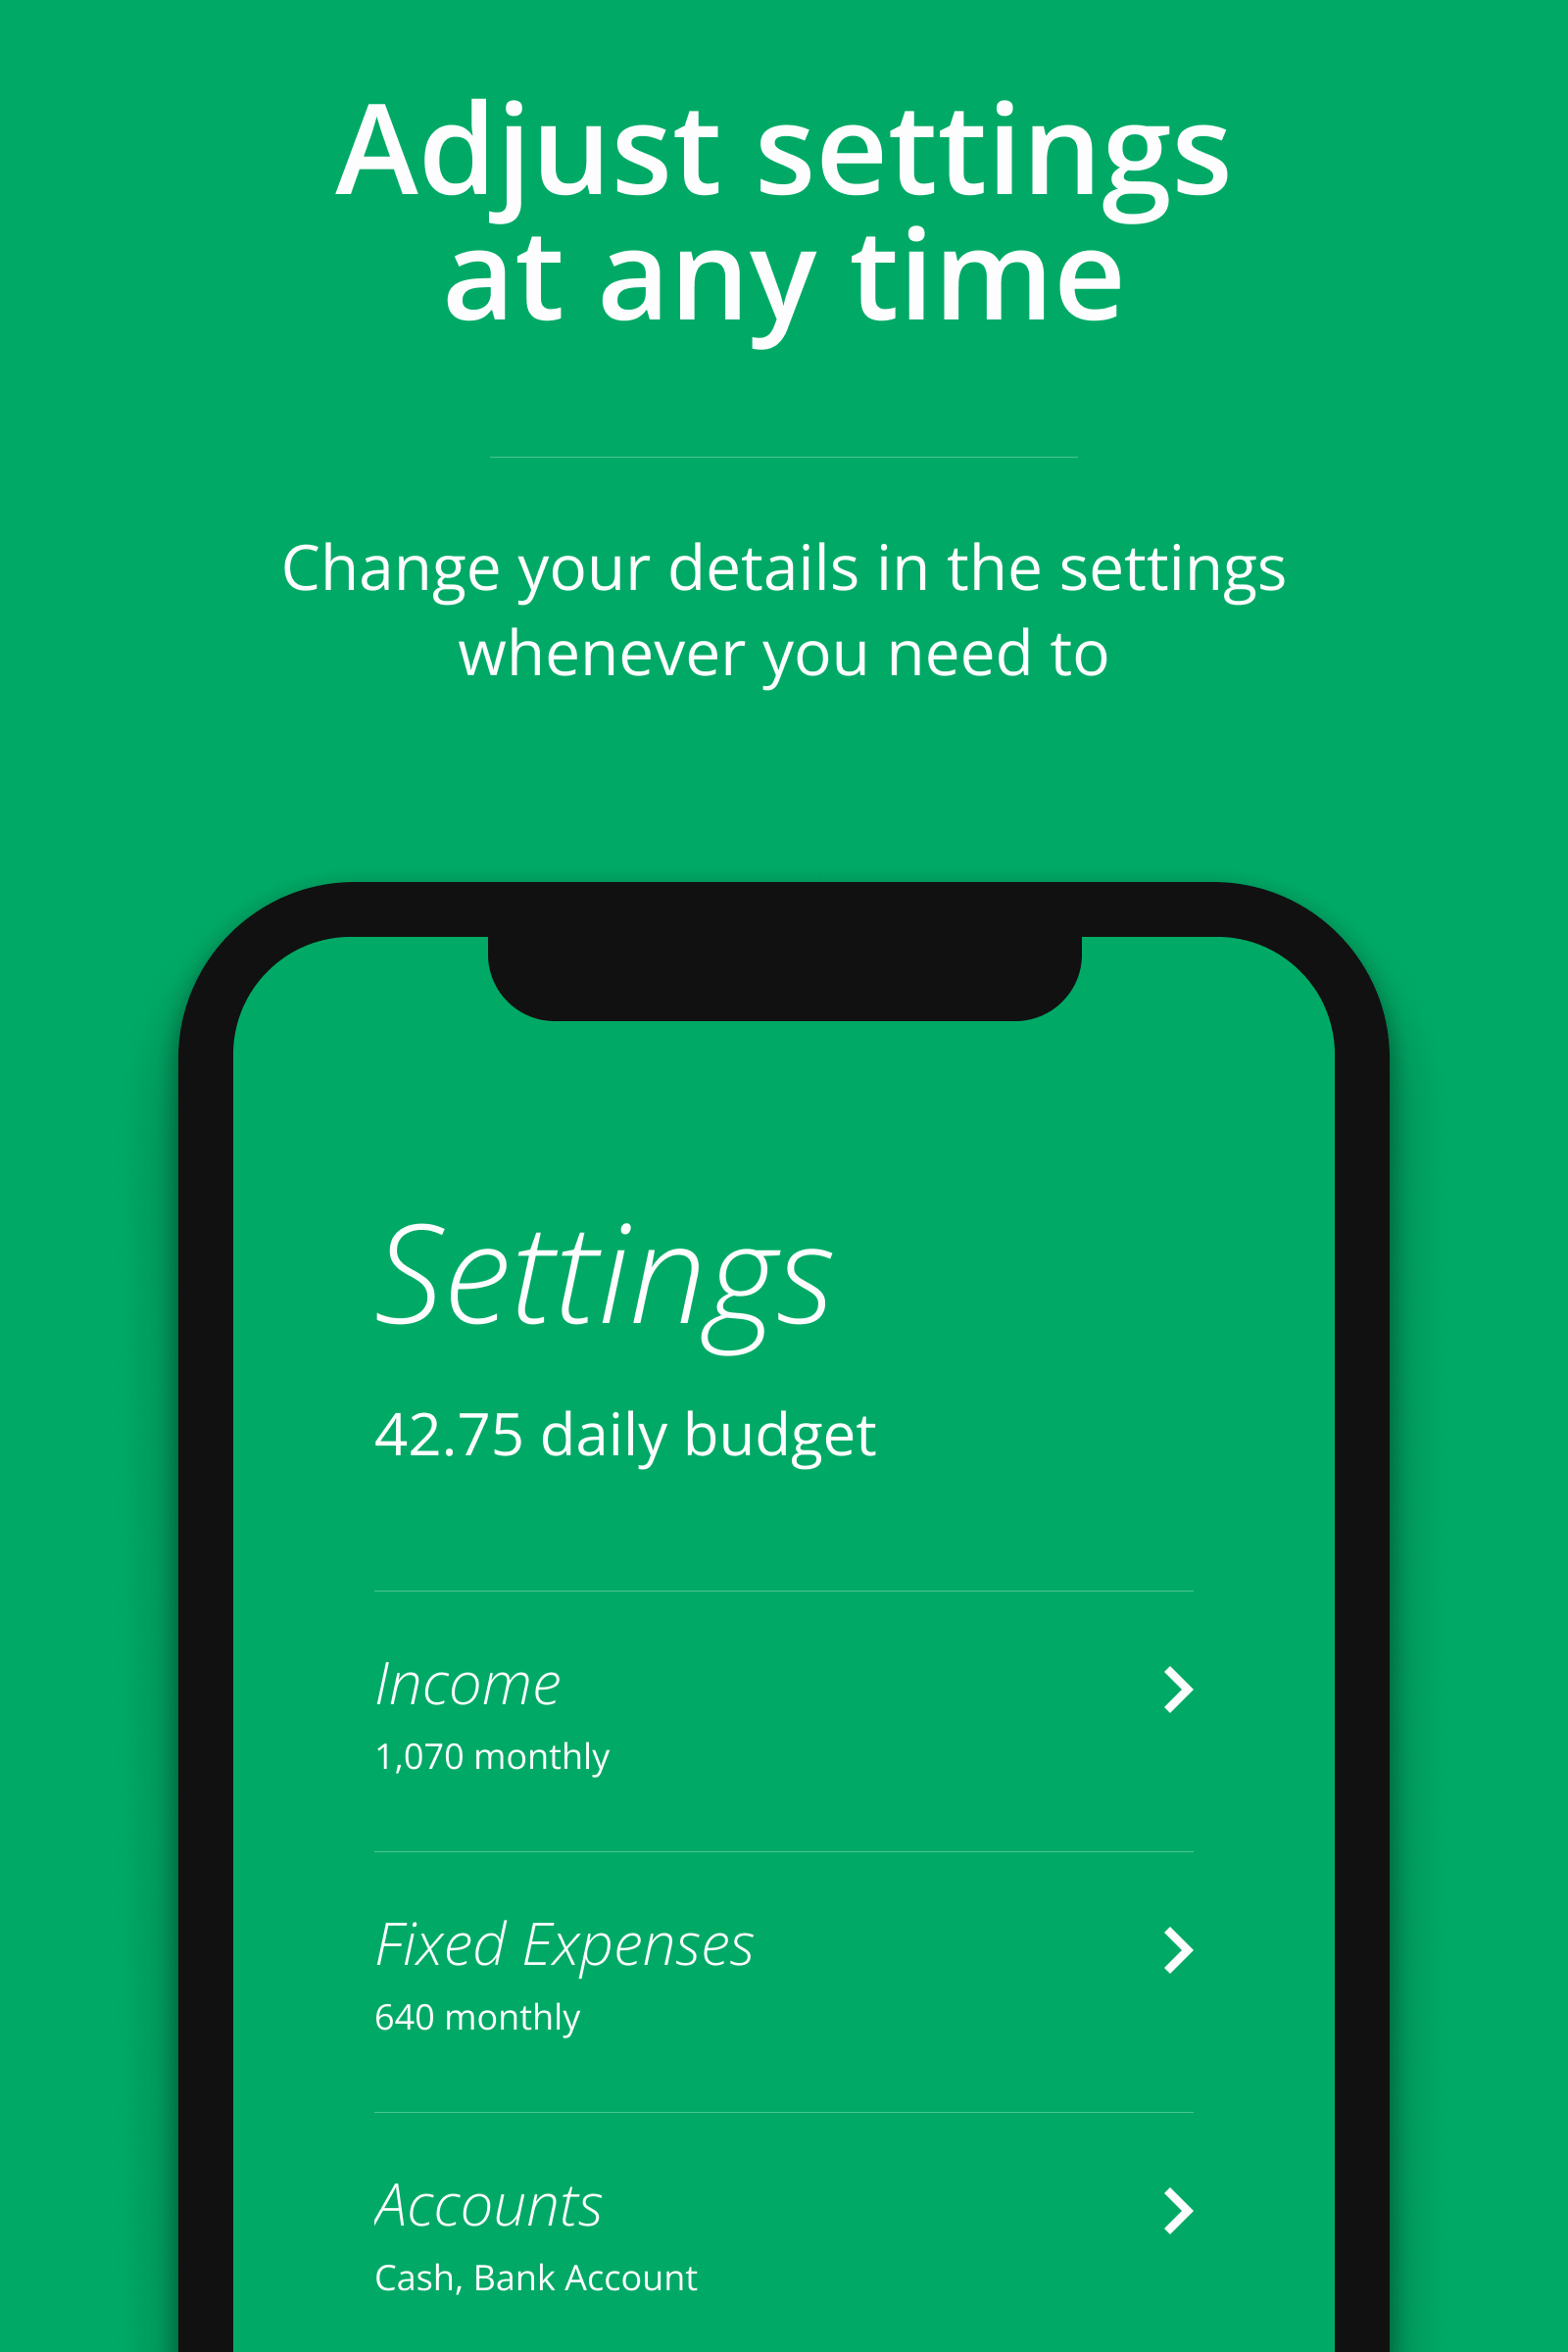 Adjust settings at any time